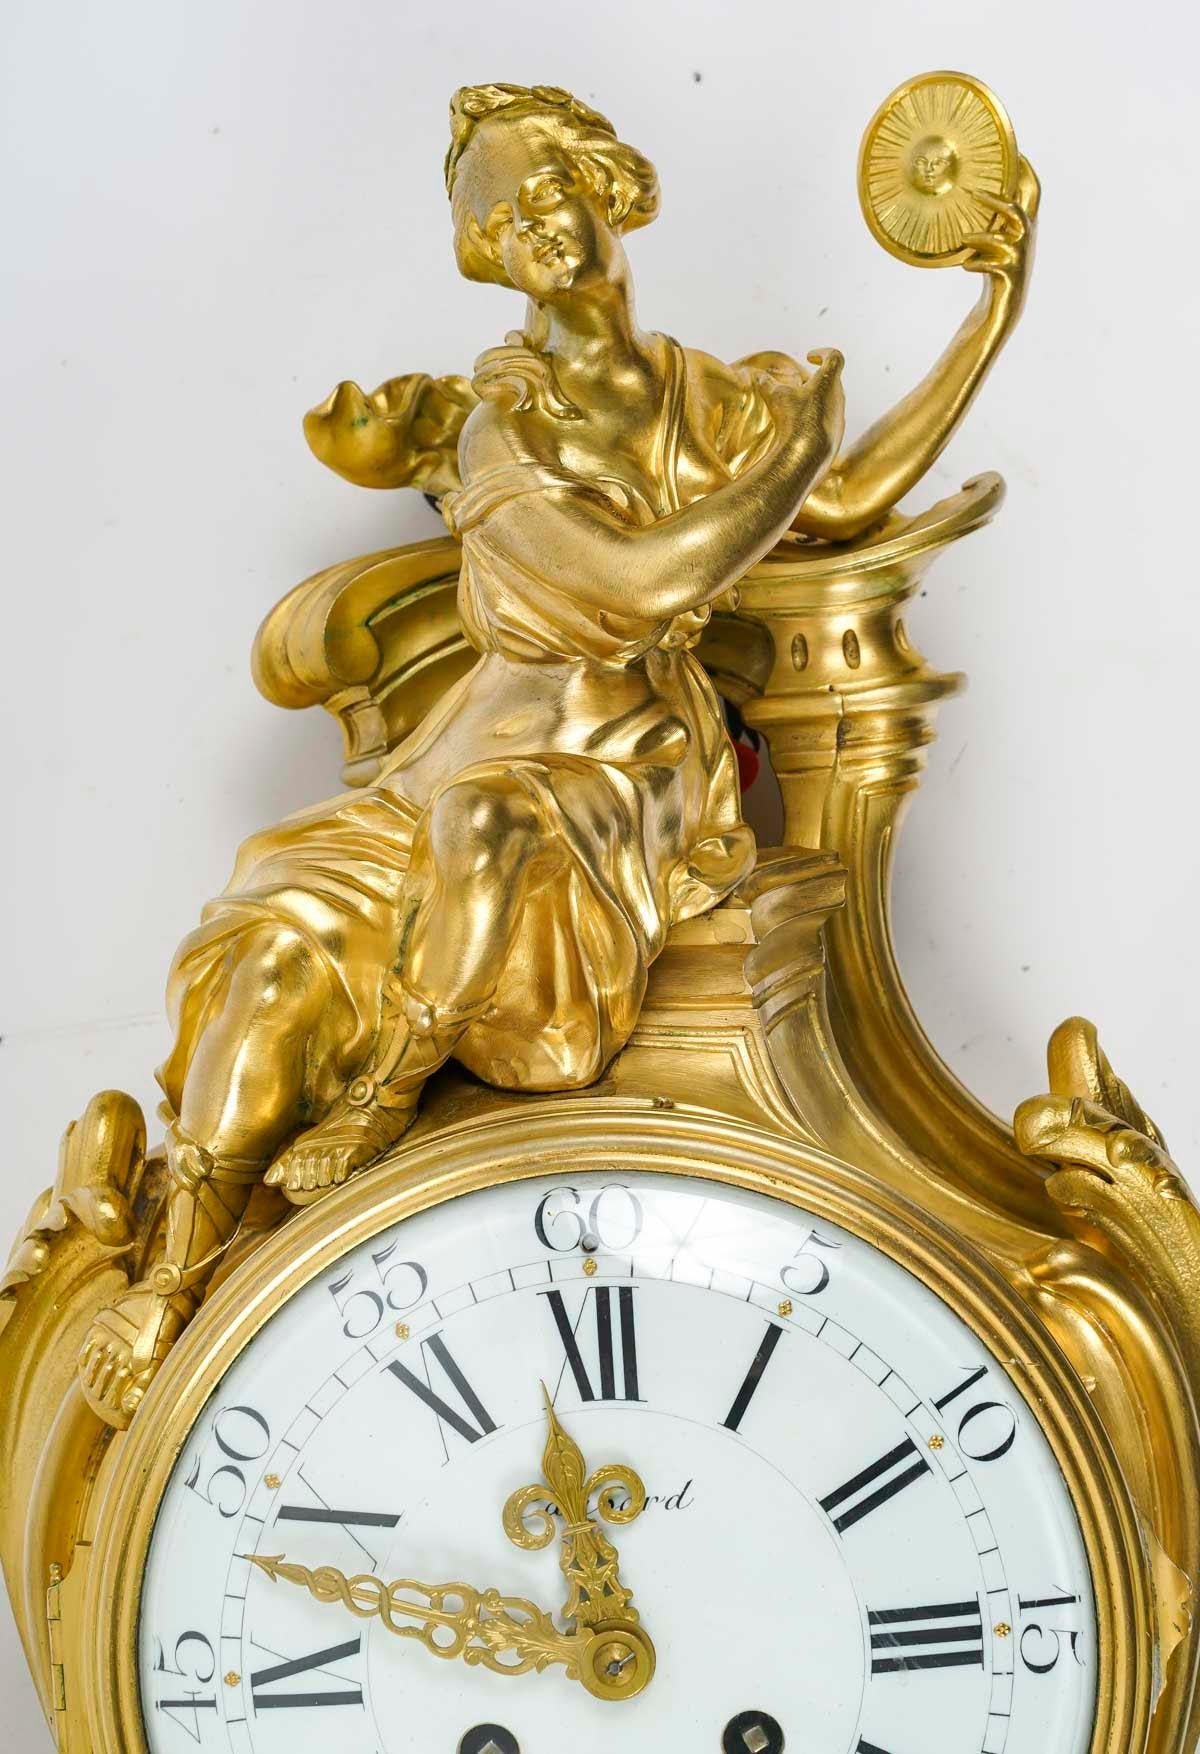 Wall-mounted gilt bronze cartel in the Louis XV style with its gilt bronze console bracket, 19th century.

Wall clock, gilt bronze wall clock from the 19th century, Napoleon III period, circa 1880, with its gilt bronze wall console, Louis XV style,